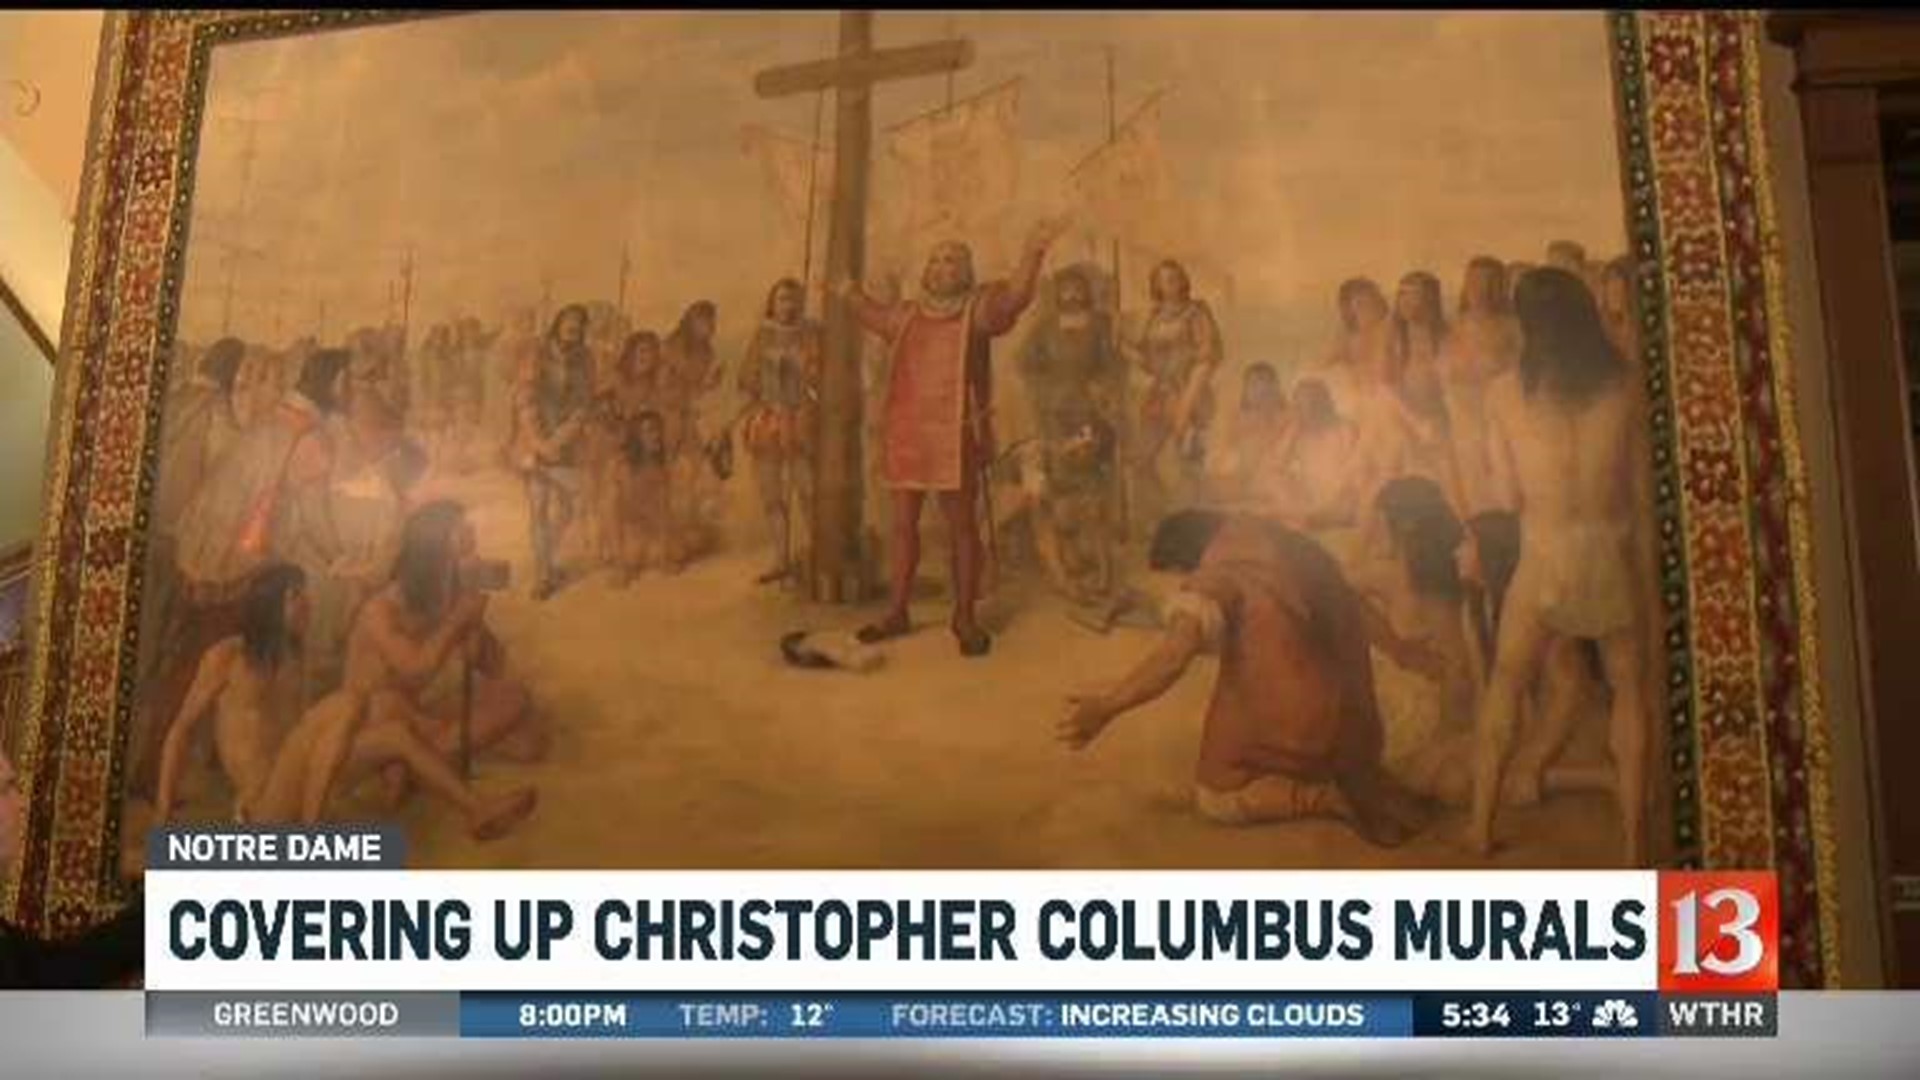 Covering up Christopher Columbus murals